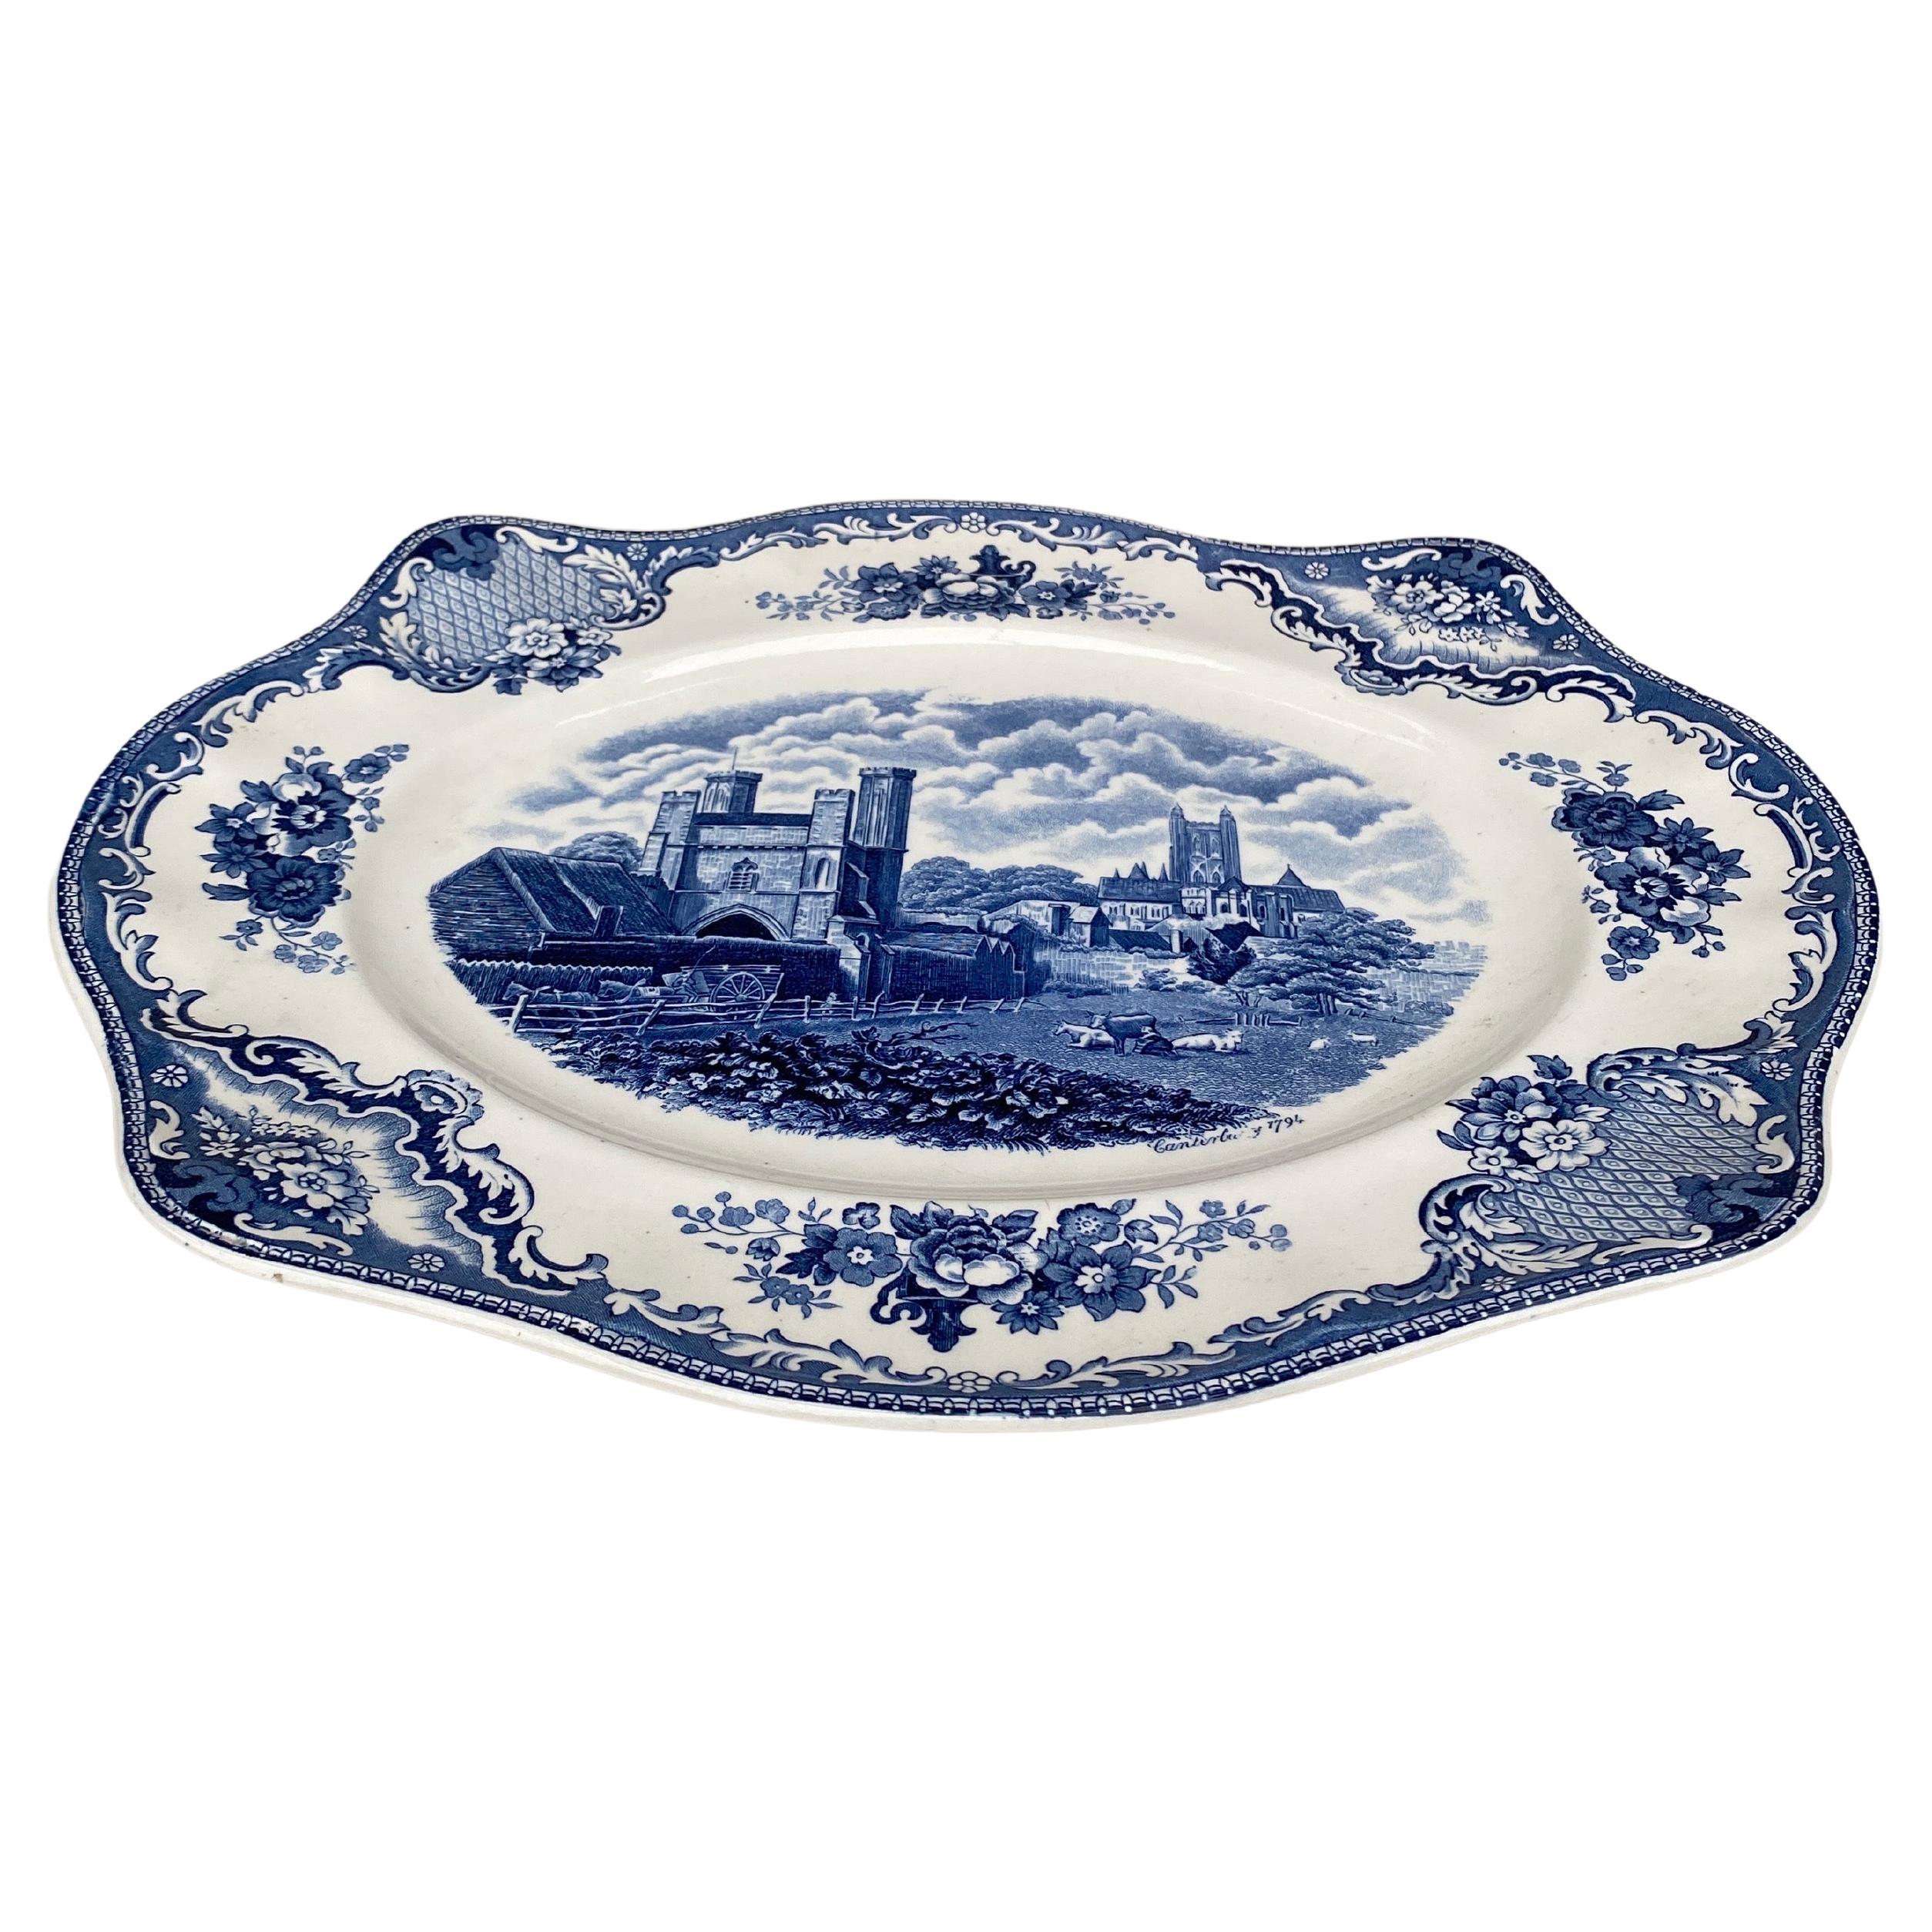 English blue & white Serving Platter signed Johnson Brothers Old Britain Castles circa 1960.
Canterbury 1794.
